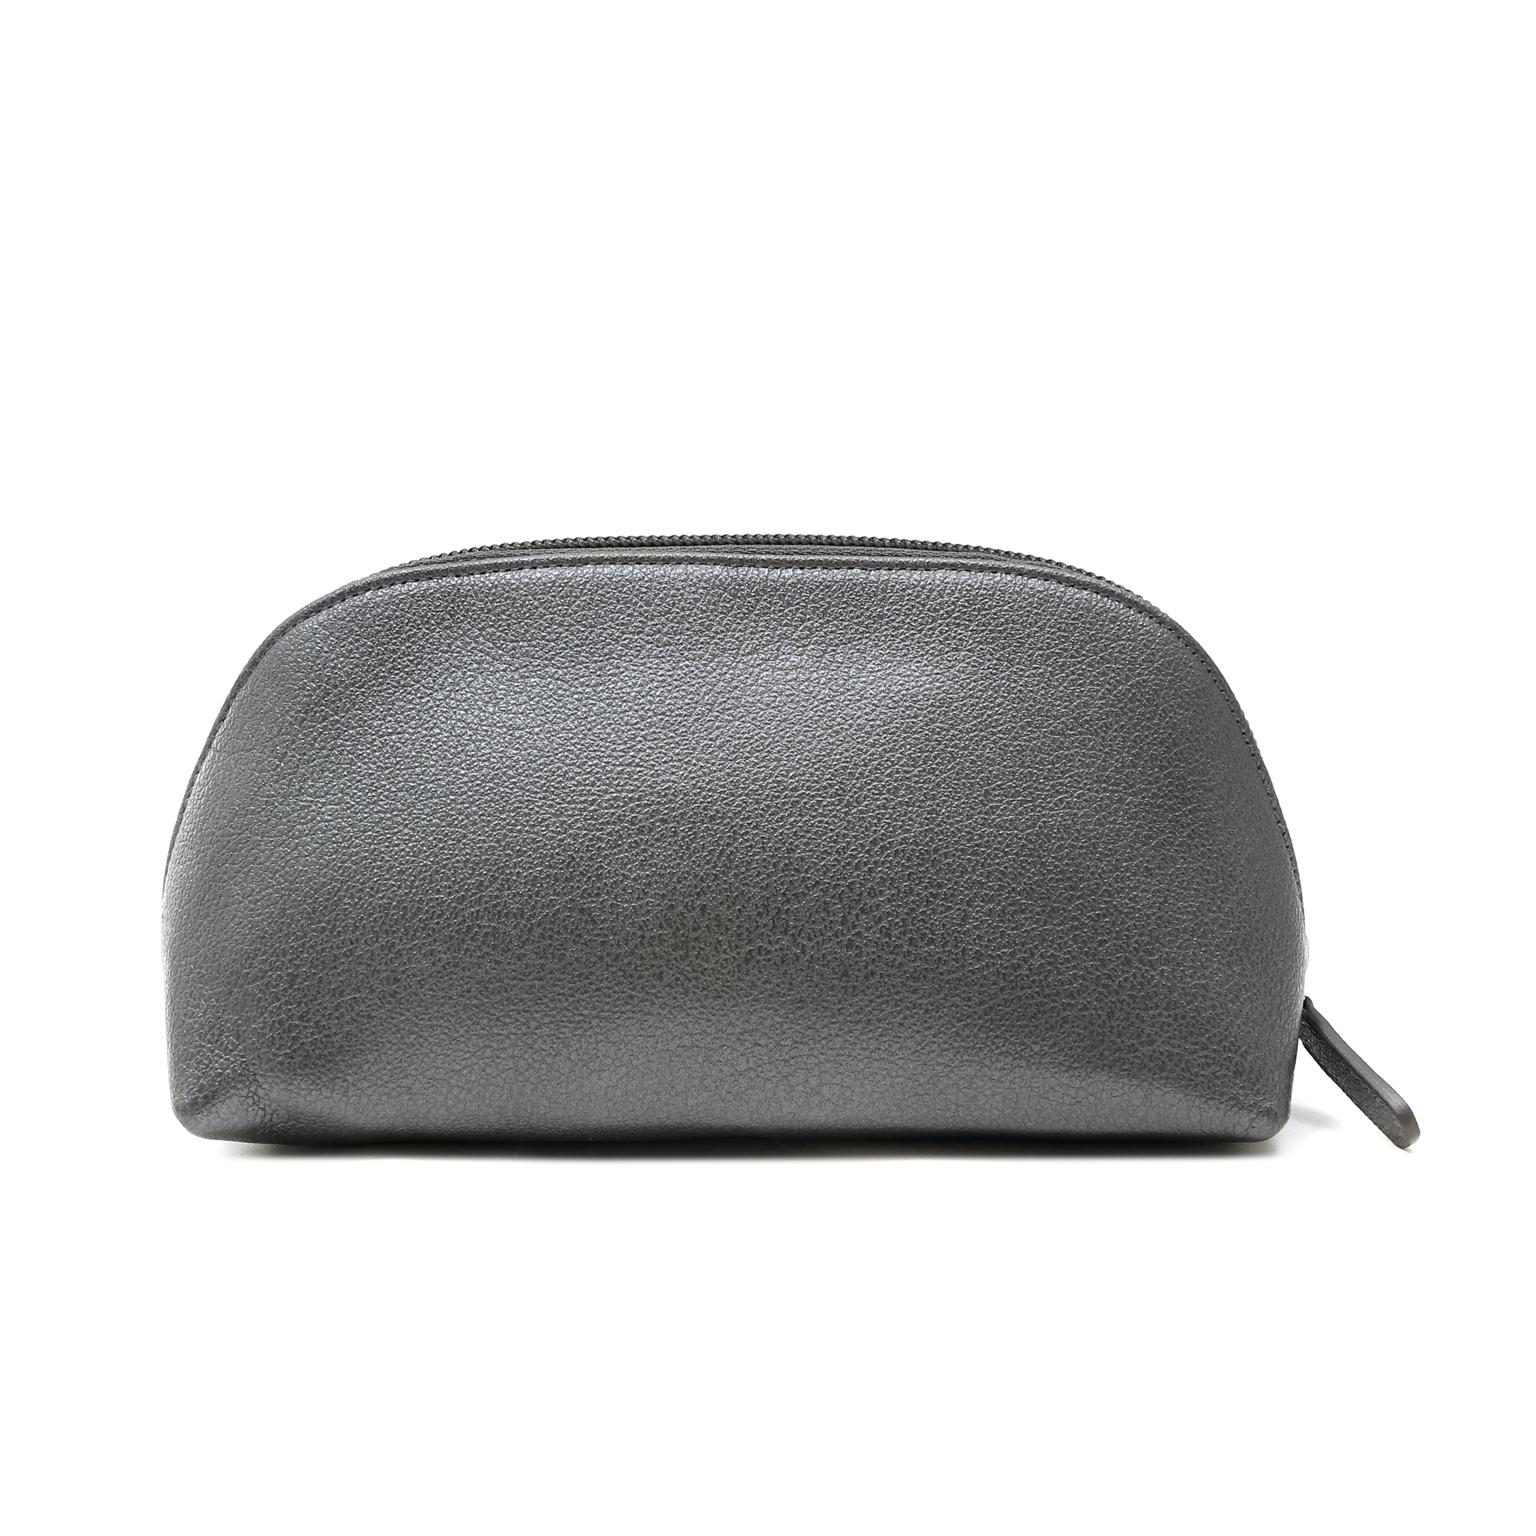 This authentic Chanel Small Slate Grey Camellia Pouch is in excellent plus condition.  Perfect for cosmetics or other small necessary items, this chic pouch is a great find.
Slate grey domed leather pouch with zippered top opening.  Clean fabric